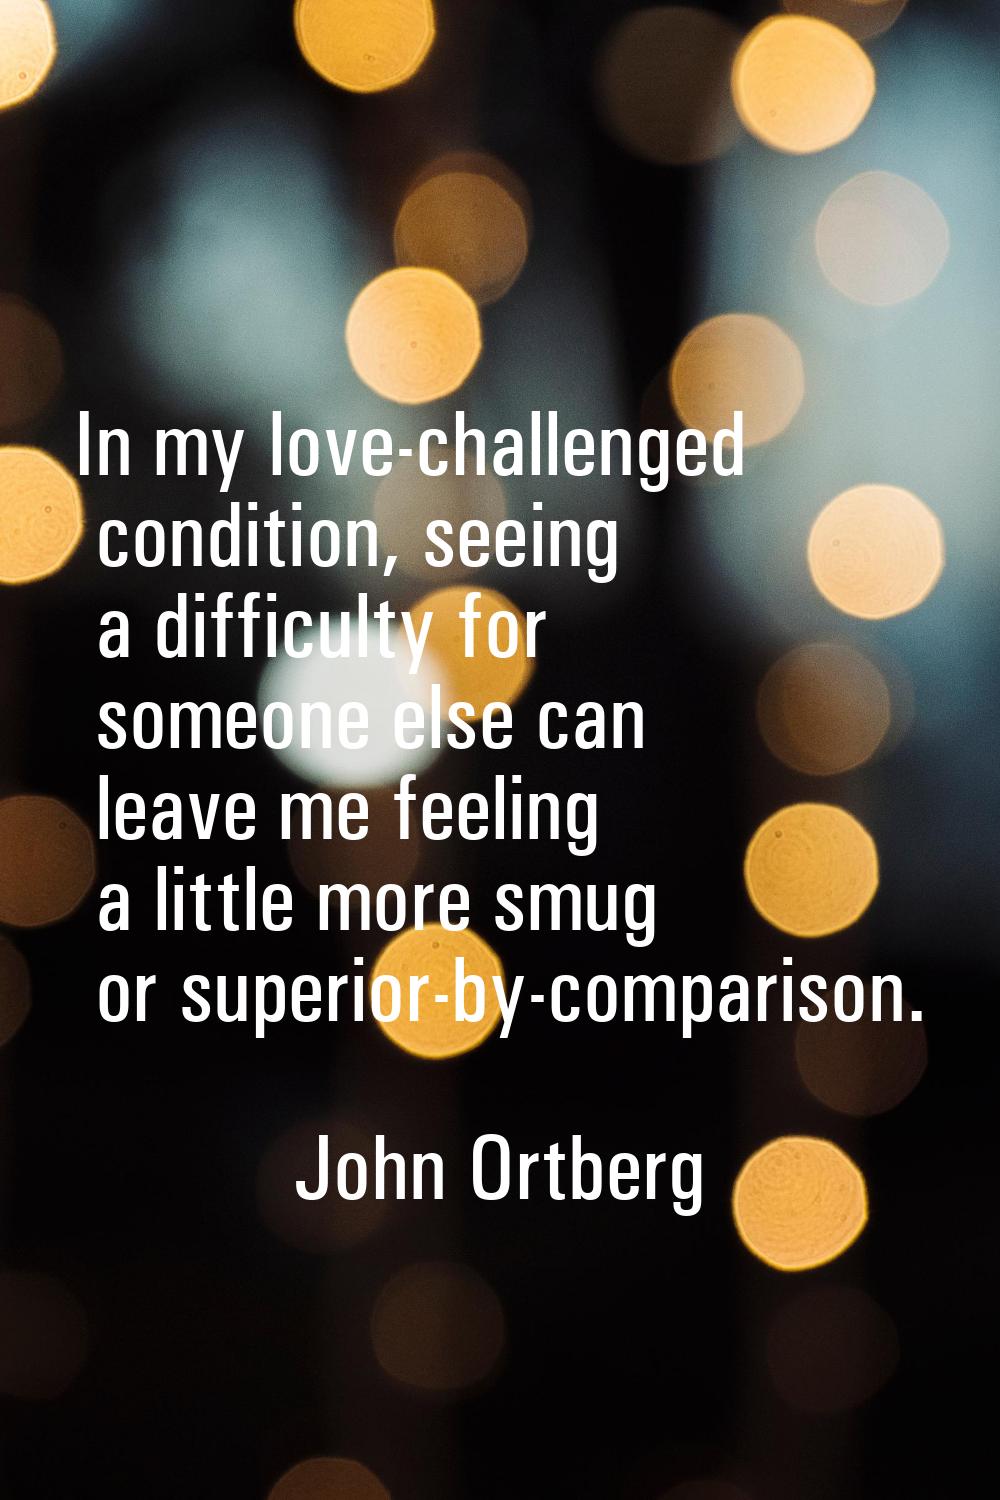 In my love-challenged condition, seeing a difficulty for someone else can leave me feeling a little